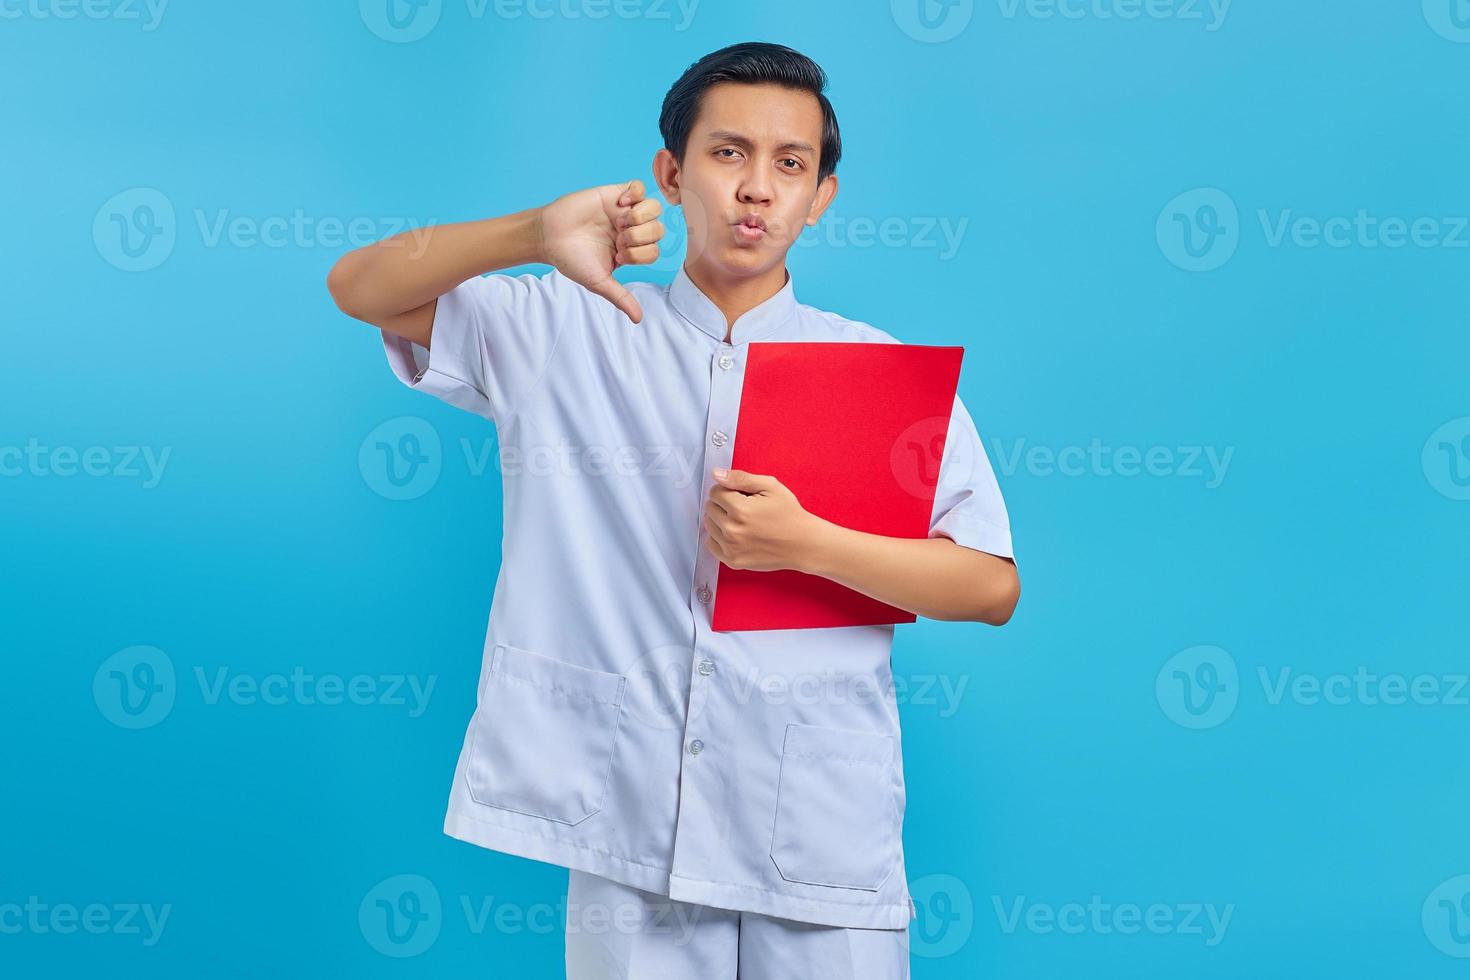 Angry young male nurse holding red folder and thumbs down gesture on blue background photo